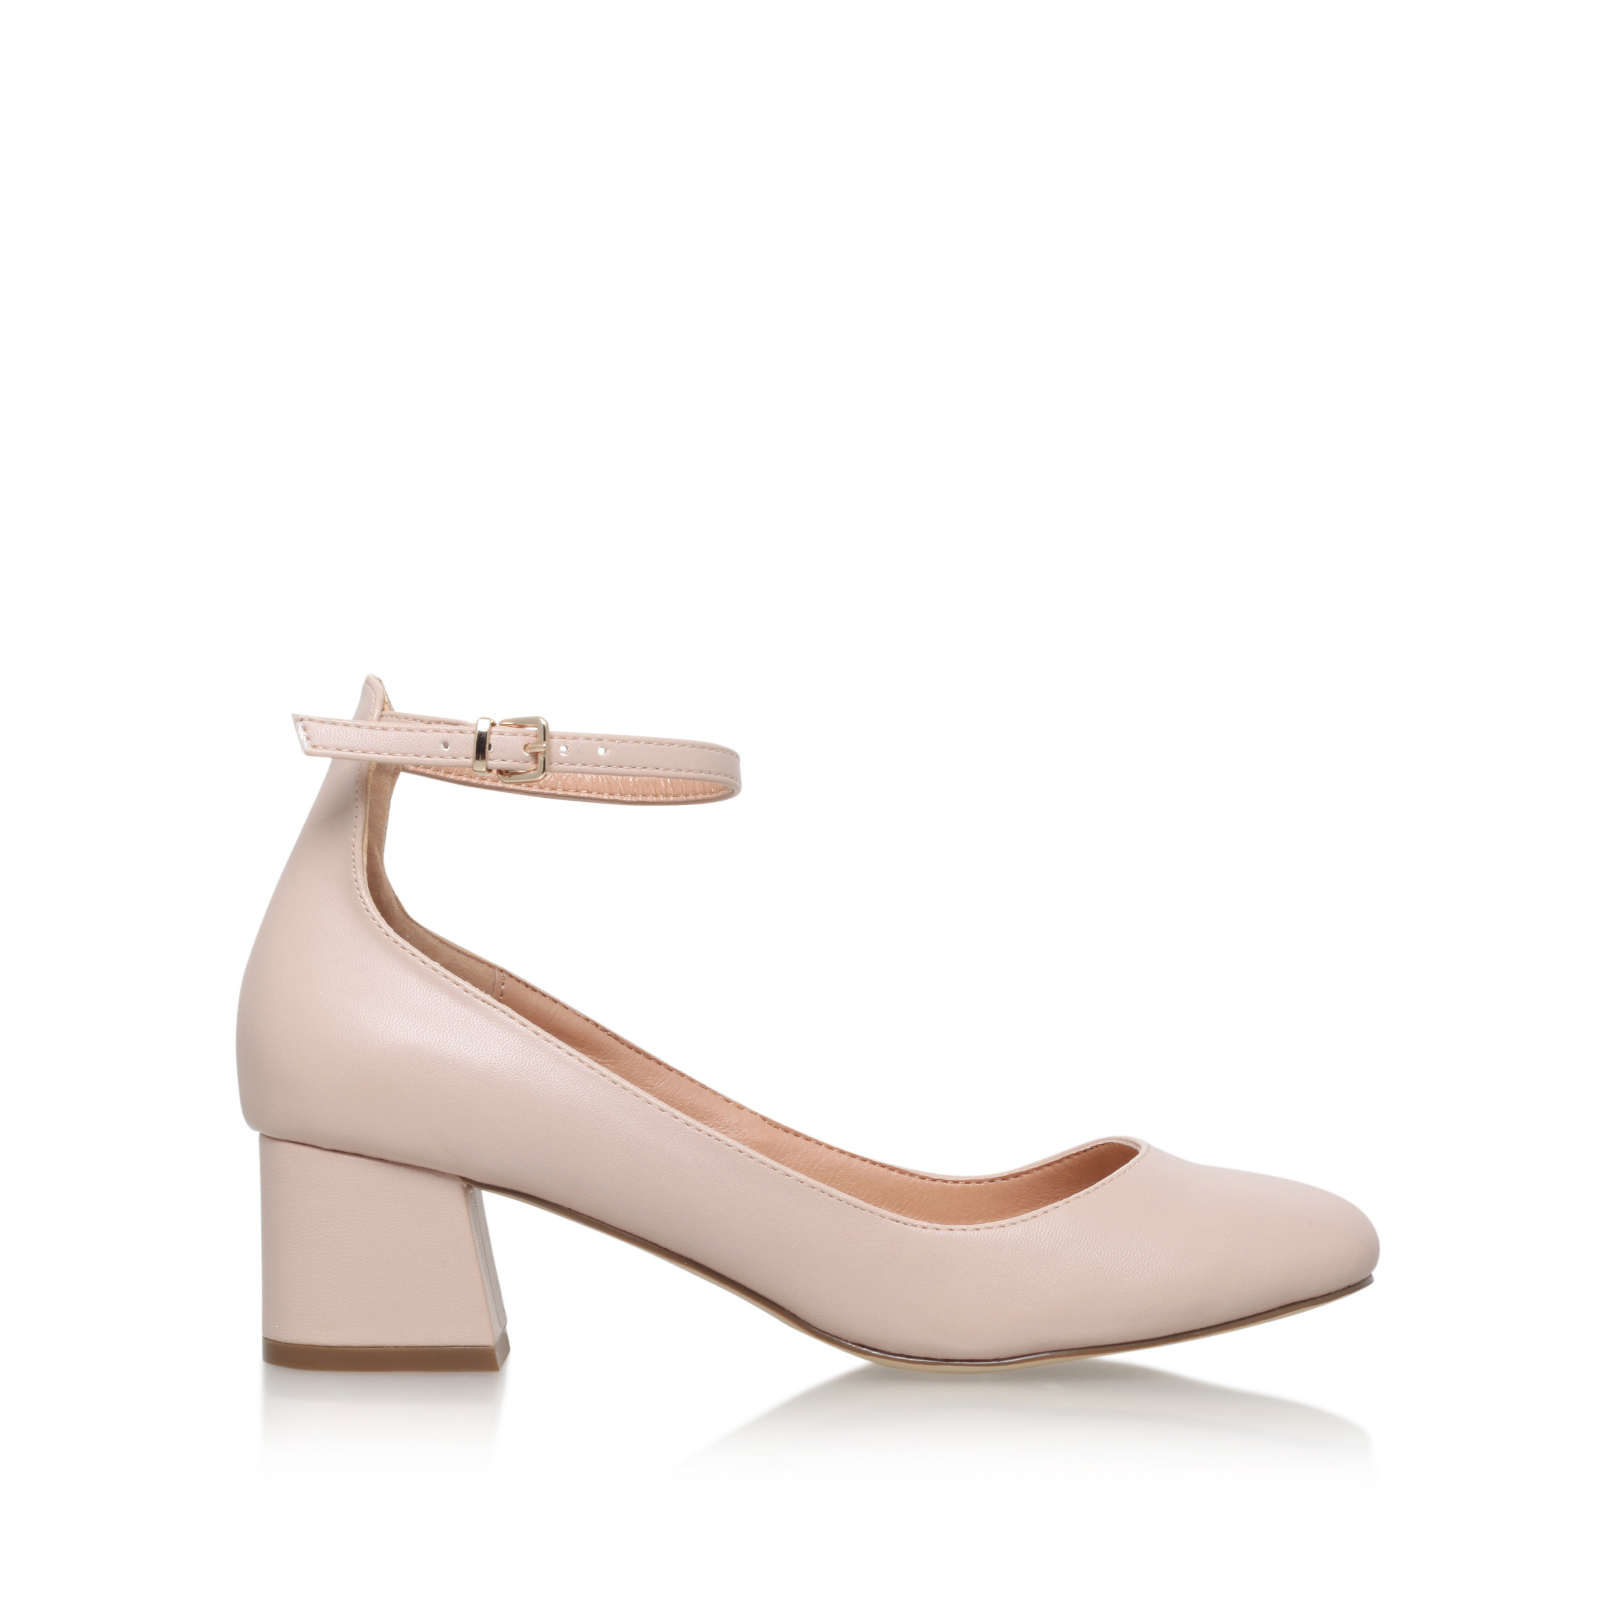 AMBER Miss KG Amber Nude Court Shoes by MISS KG